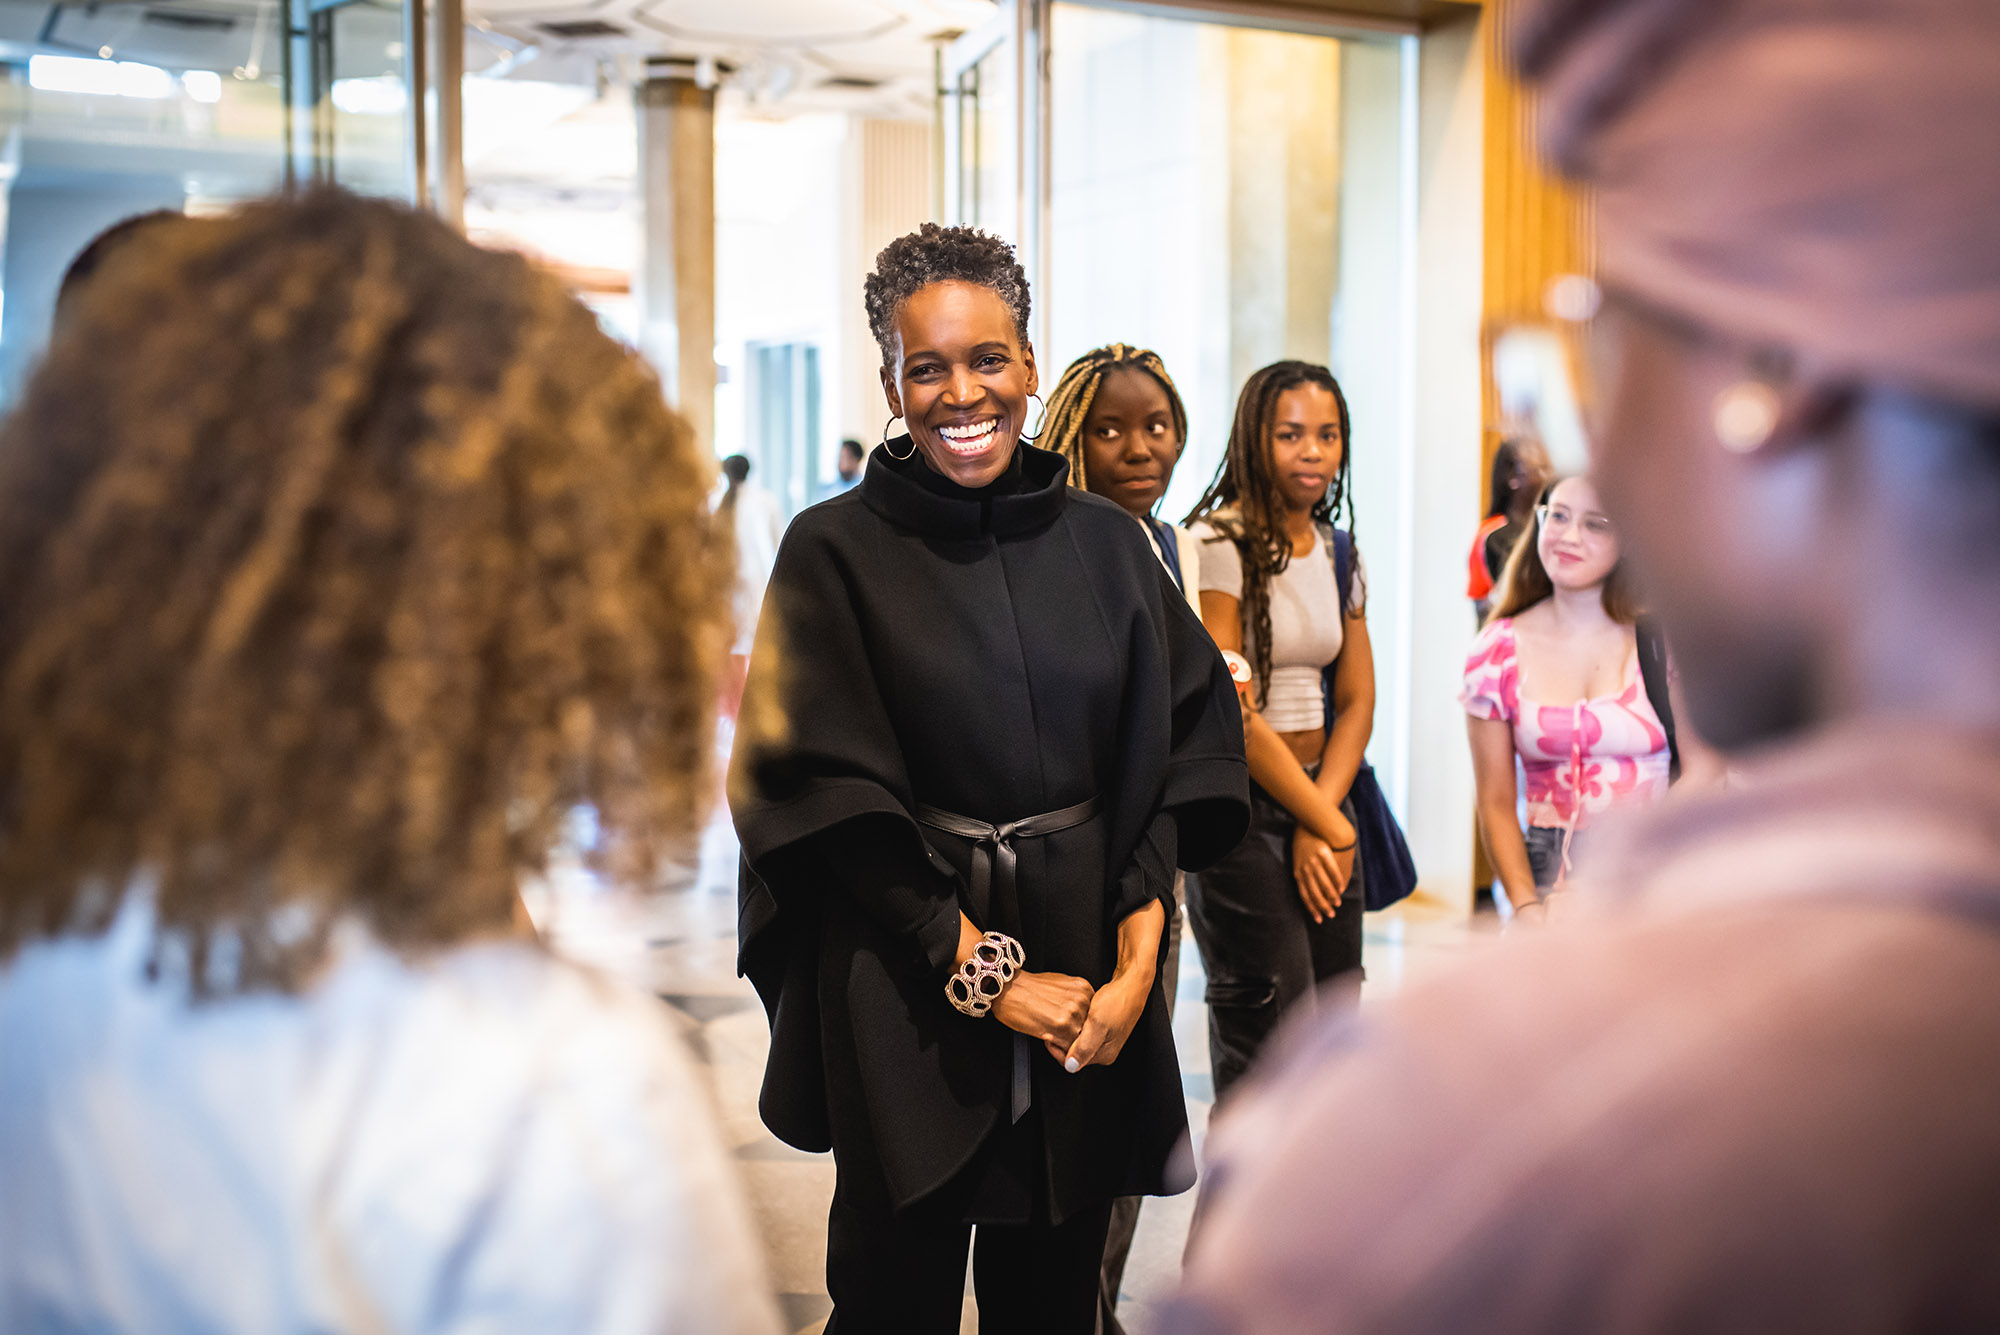 Photo: Melissa Gilliam, a Black woman wearing a black jacket and pants, wrapped up with a meet-and-greet session with students at the Howard Thurman Center. She stands at the center as various diverse students smile and look on.